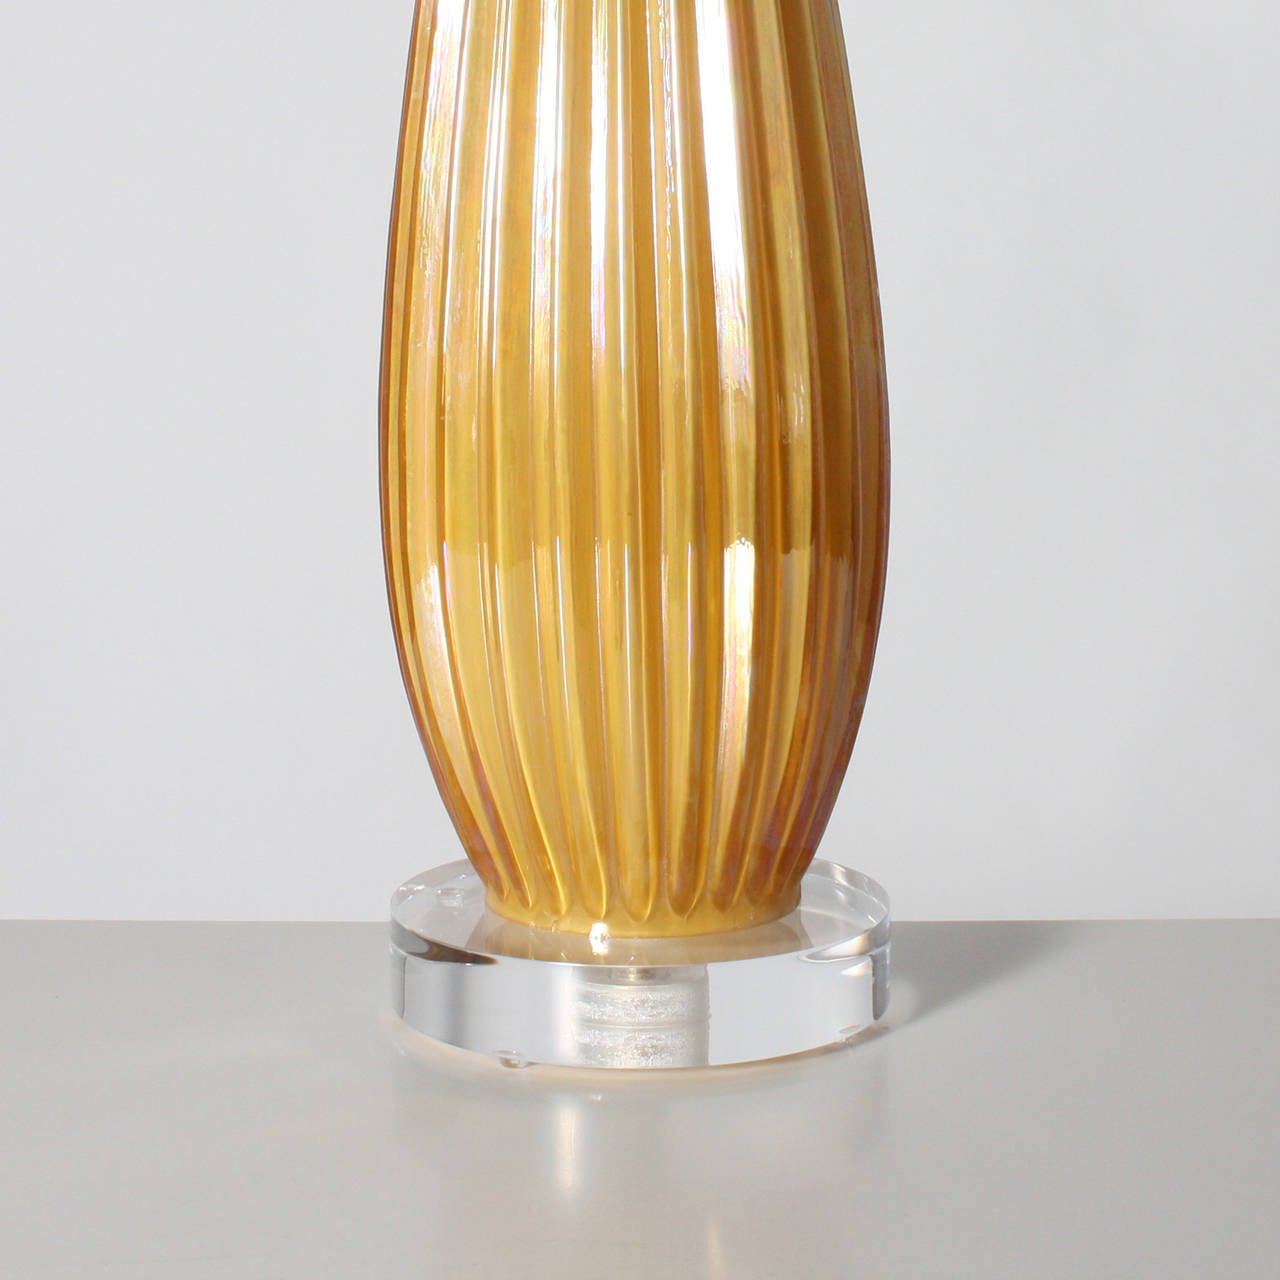 Large Seguso butterscotch Murano lamp with an iridescent shimmer. Off-white pongee shade. 3 way socket, 50/100/150 watt. Brass hardware. Lucite base. Crystal ball finial. Gold twisted cording.
  